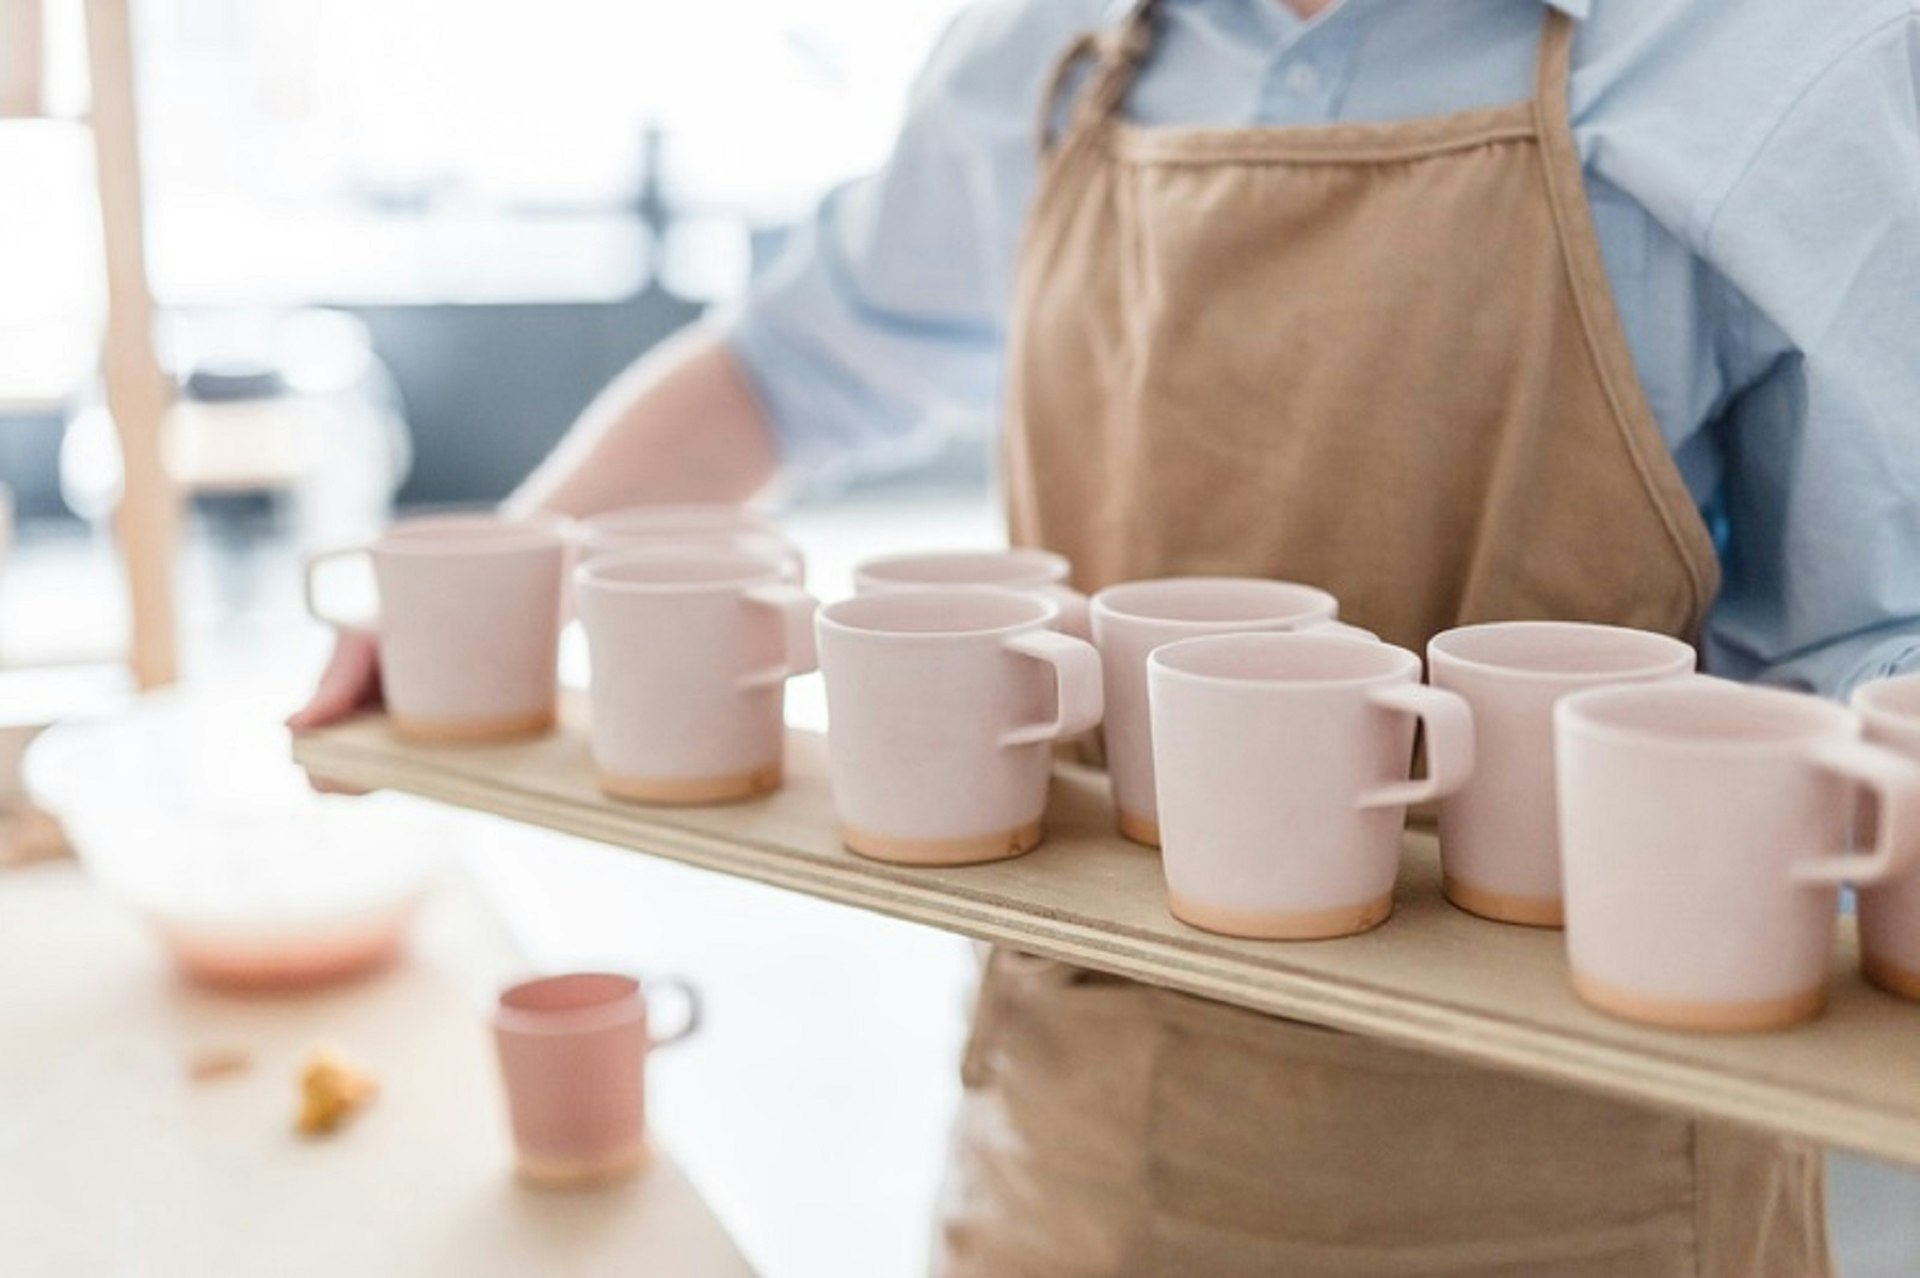 Dublin independent shops - a long wooden tray of light-pink clay mugs being carried by someone in a blue shirt and brown apron whose head's been cropped out